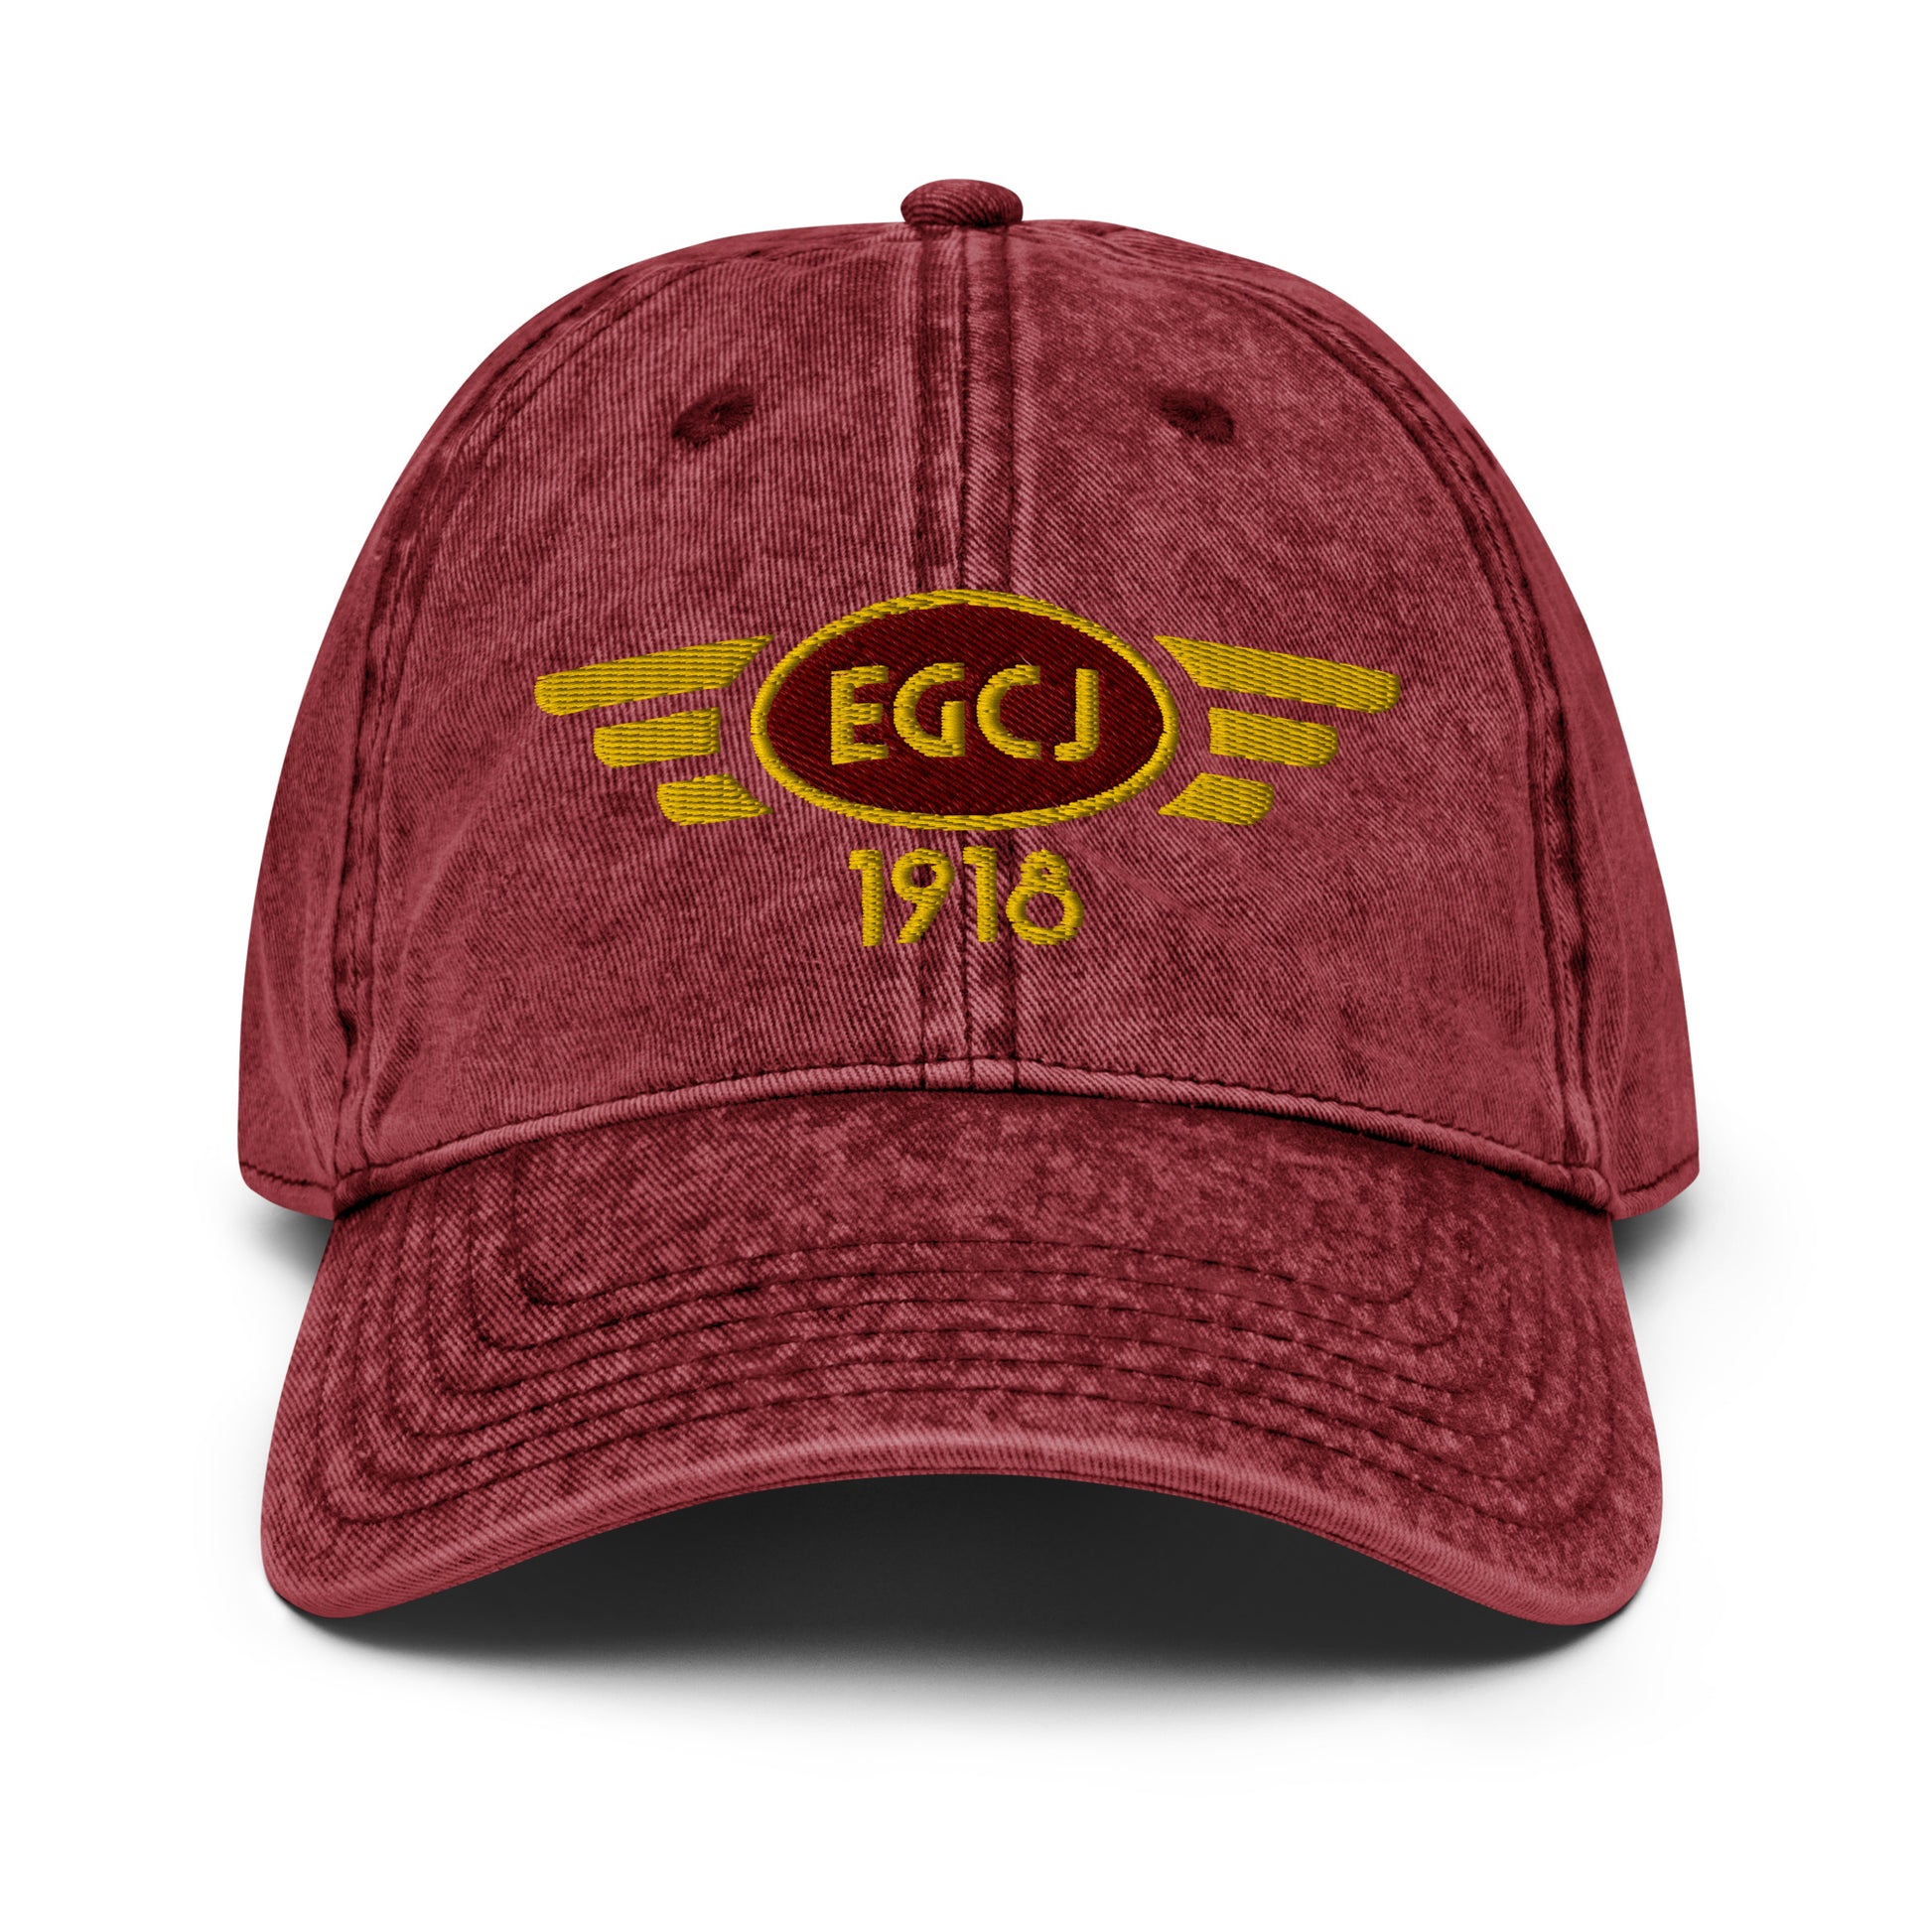 Burgundy coloured cotton twill baseball cap with embroidered vintage style aviation logo for Sherburn Airfield.